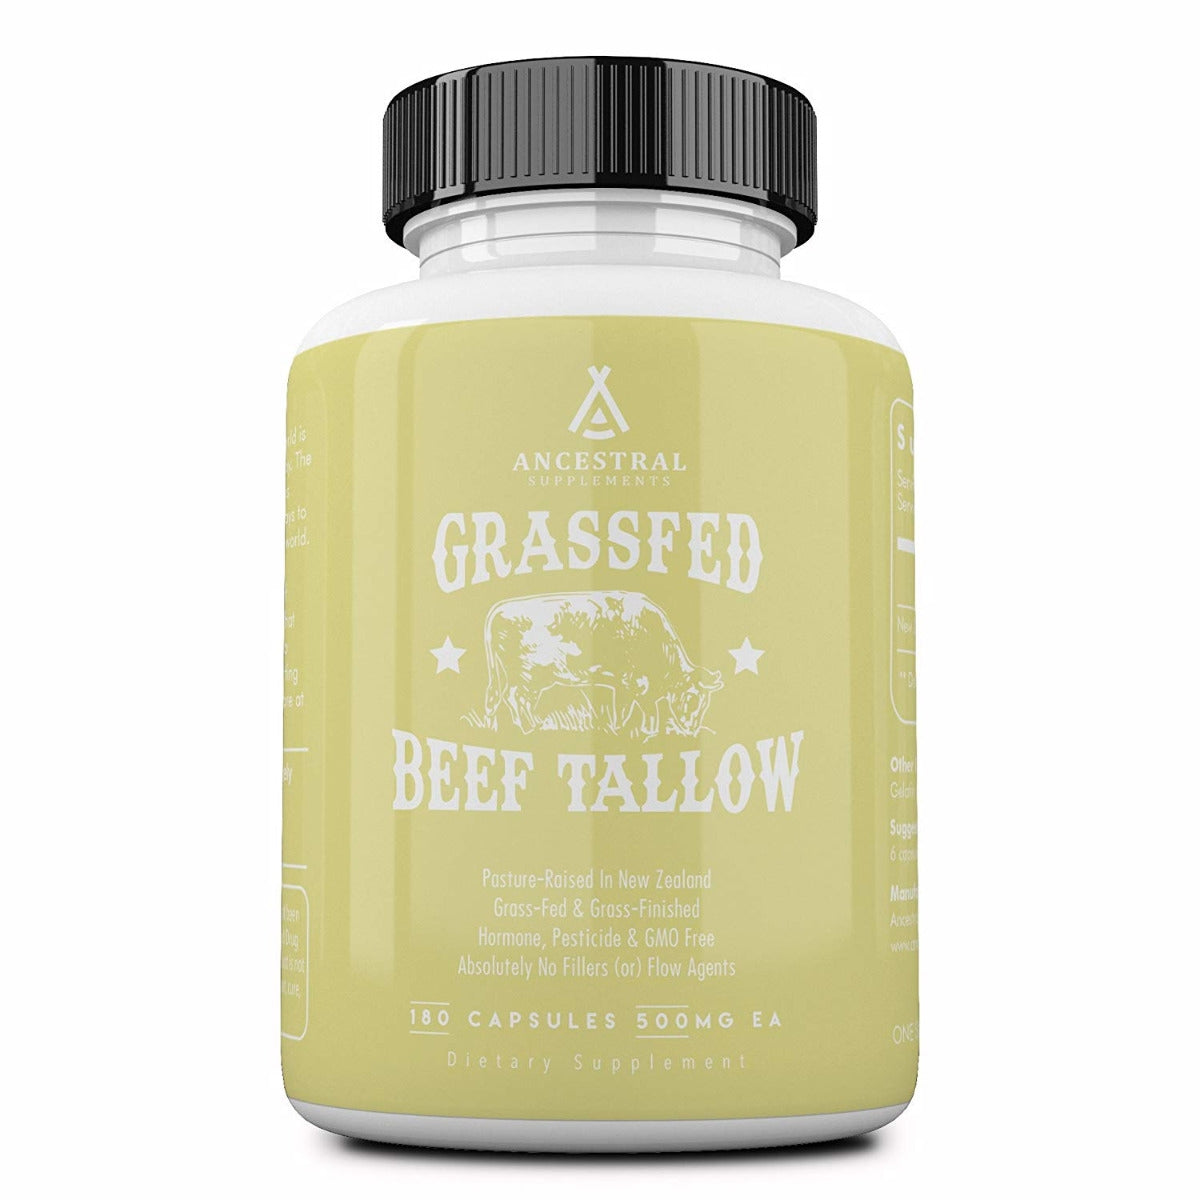 Grassfed Beef Tallow - 180 capsules